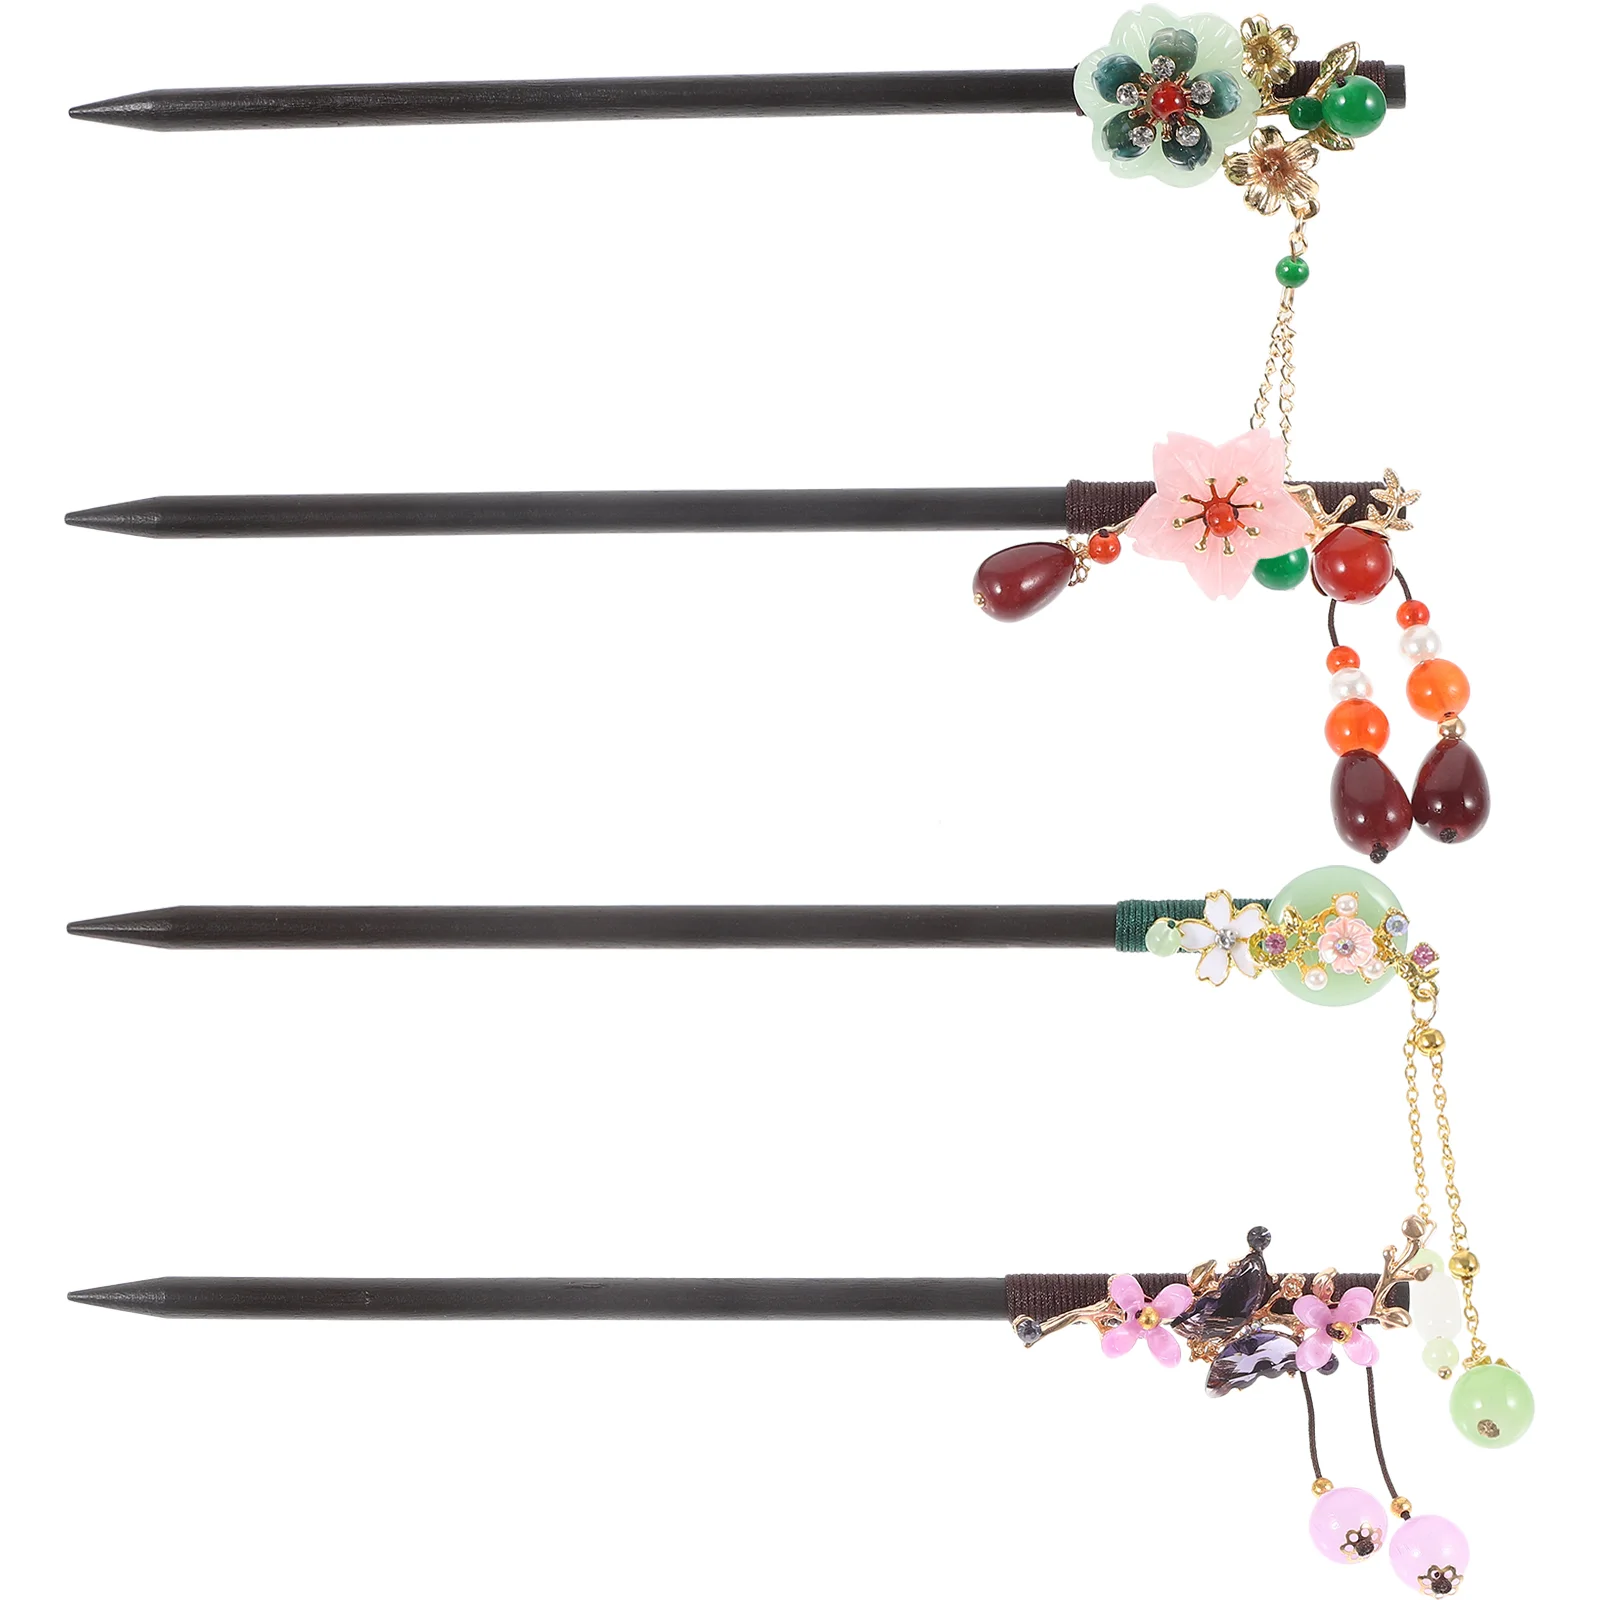 4pcs Wooden Hairpins Style Headdress Hairpin Hair Jewelry 3 size cotton filled rectangle wooden jewelry storage box vintage large chinese silk brocade decorative jewellery packaging case